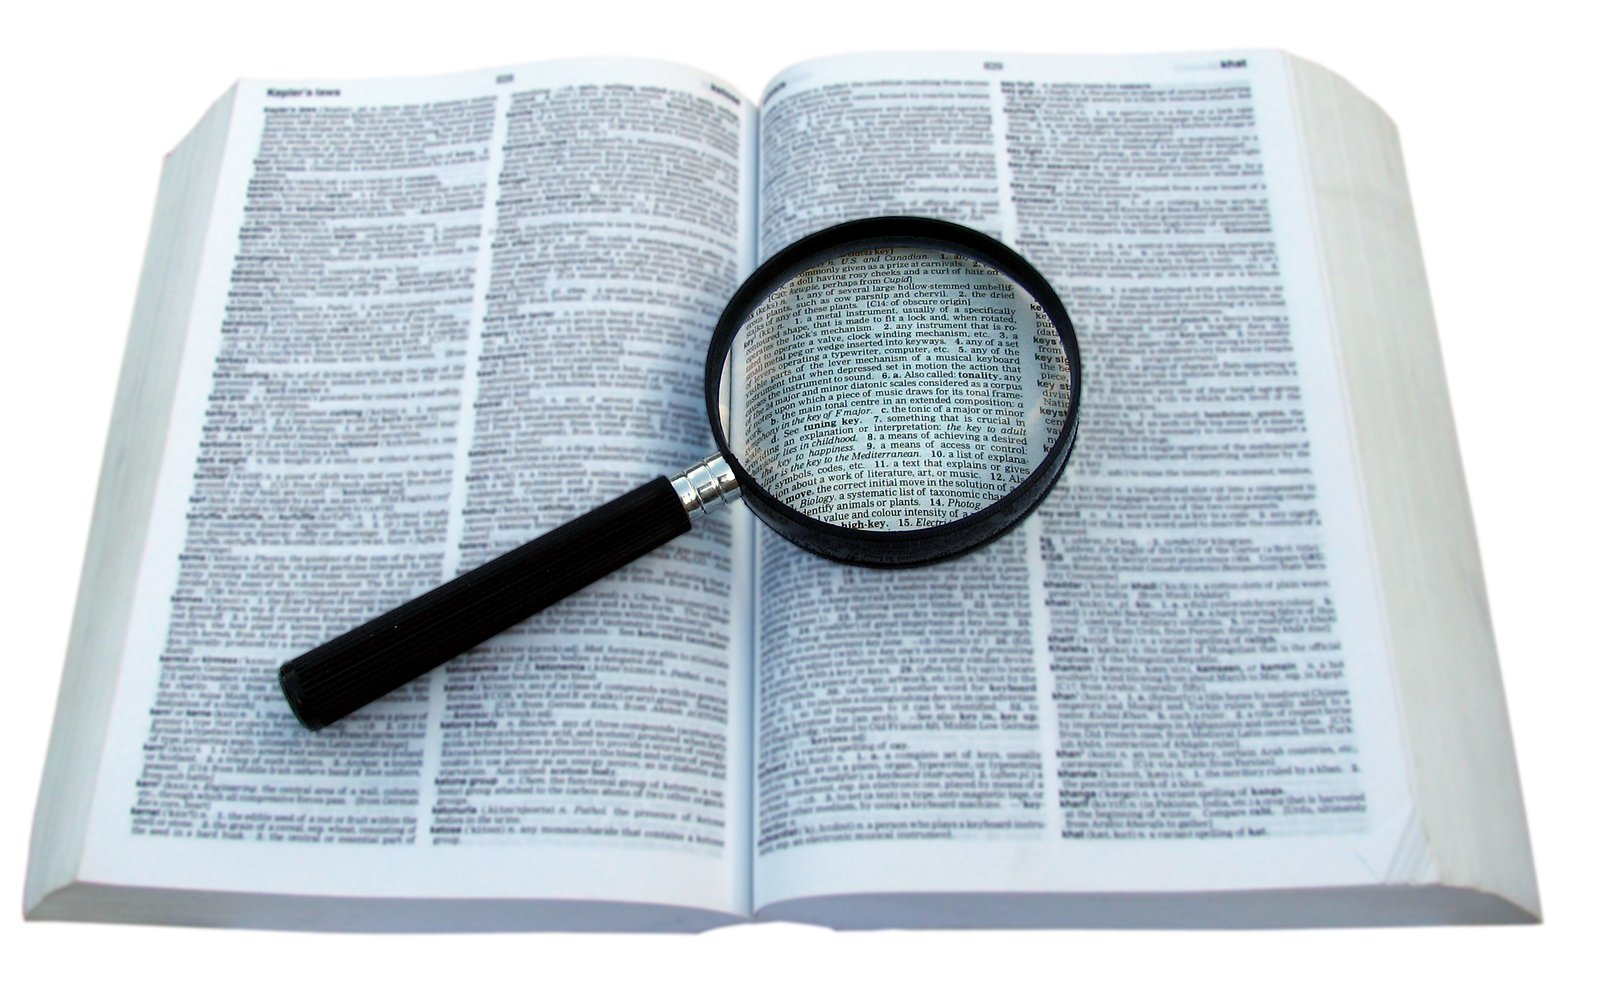 the magnifying glass is positioned above an open bible